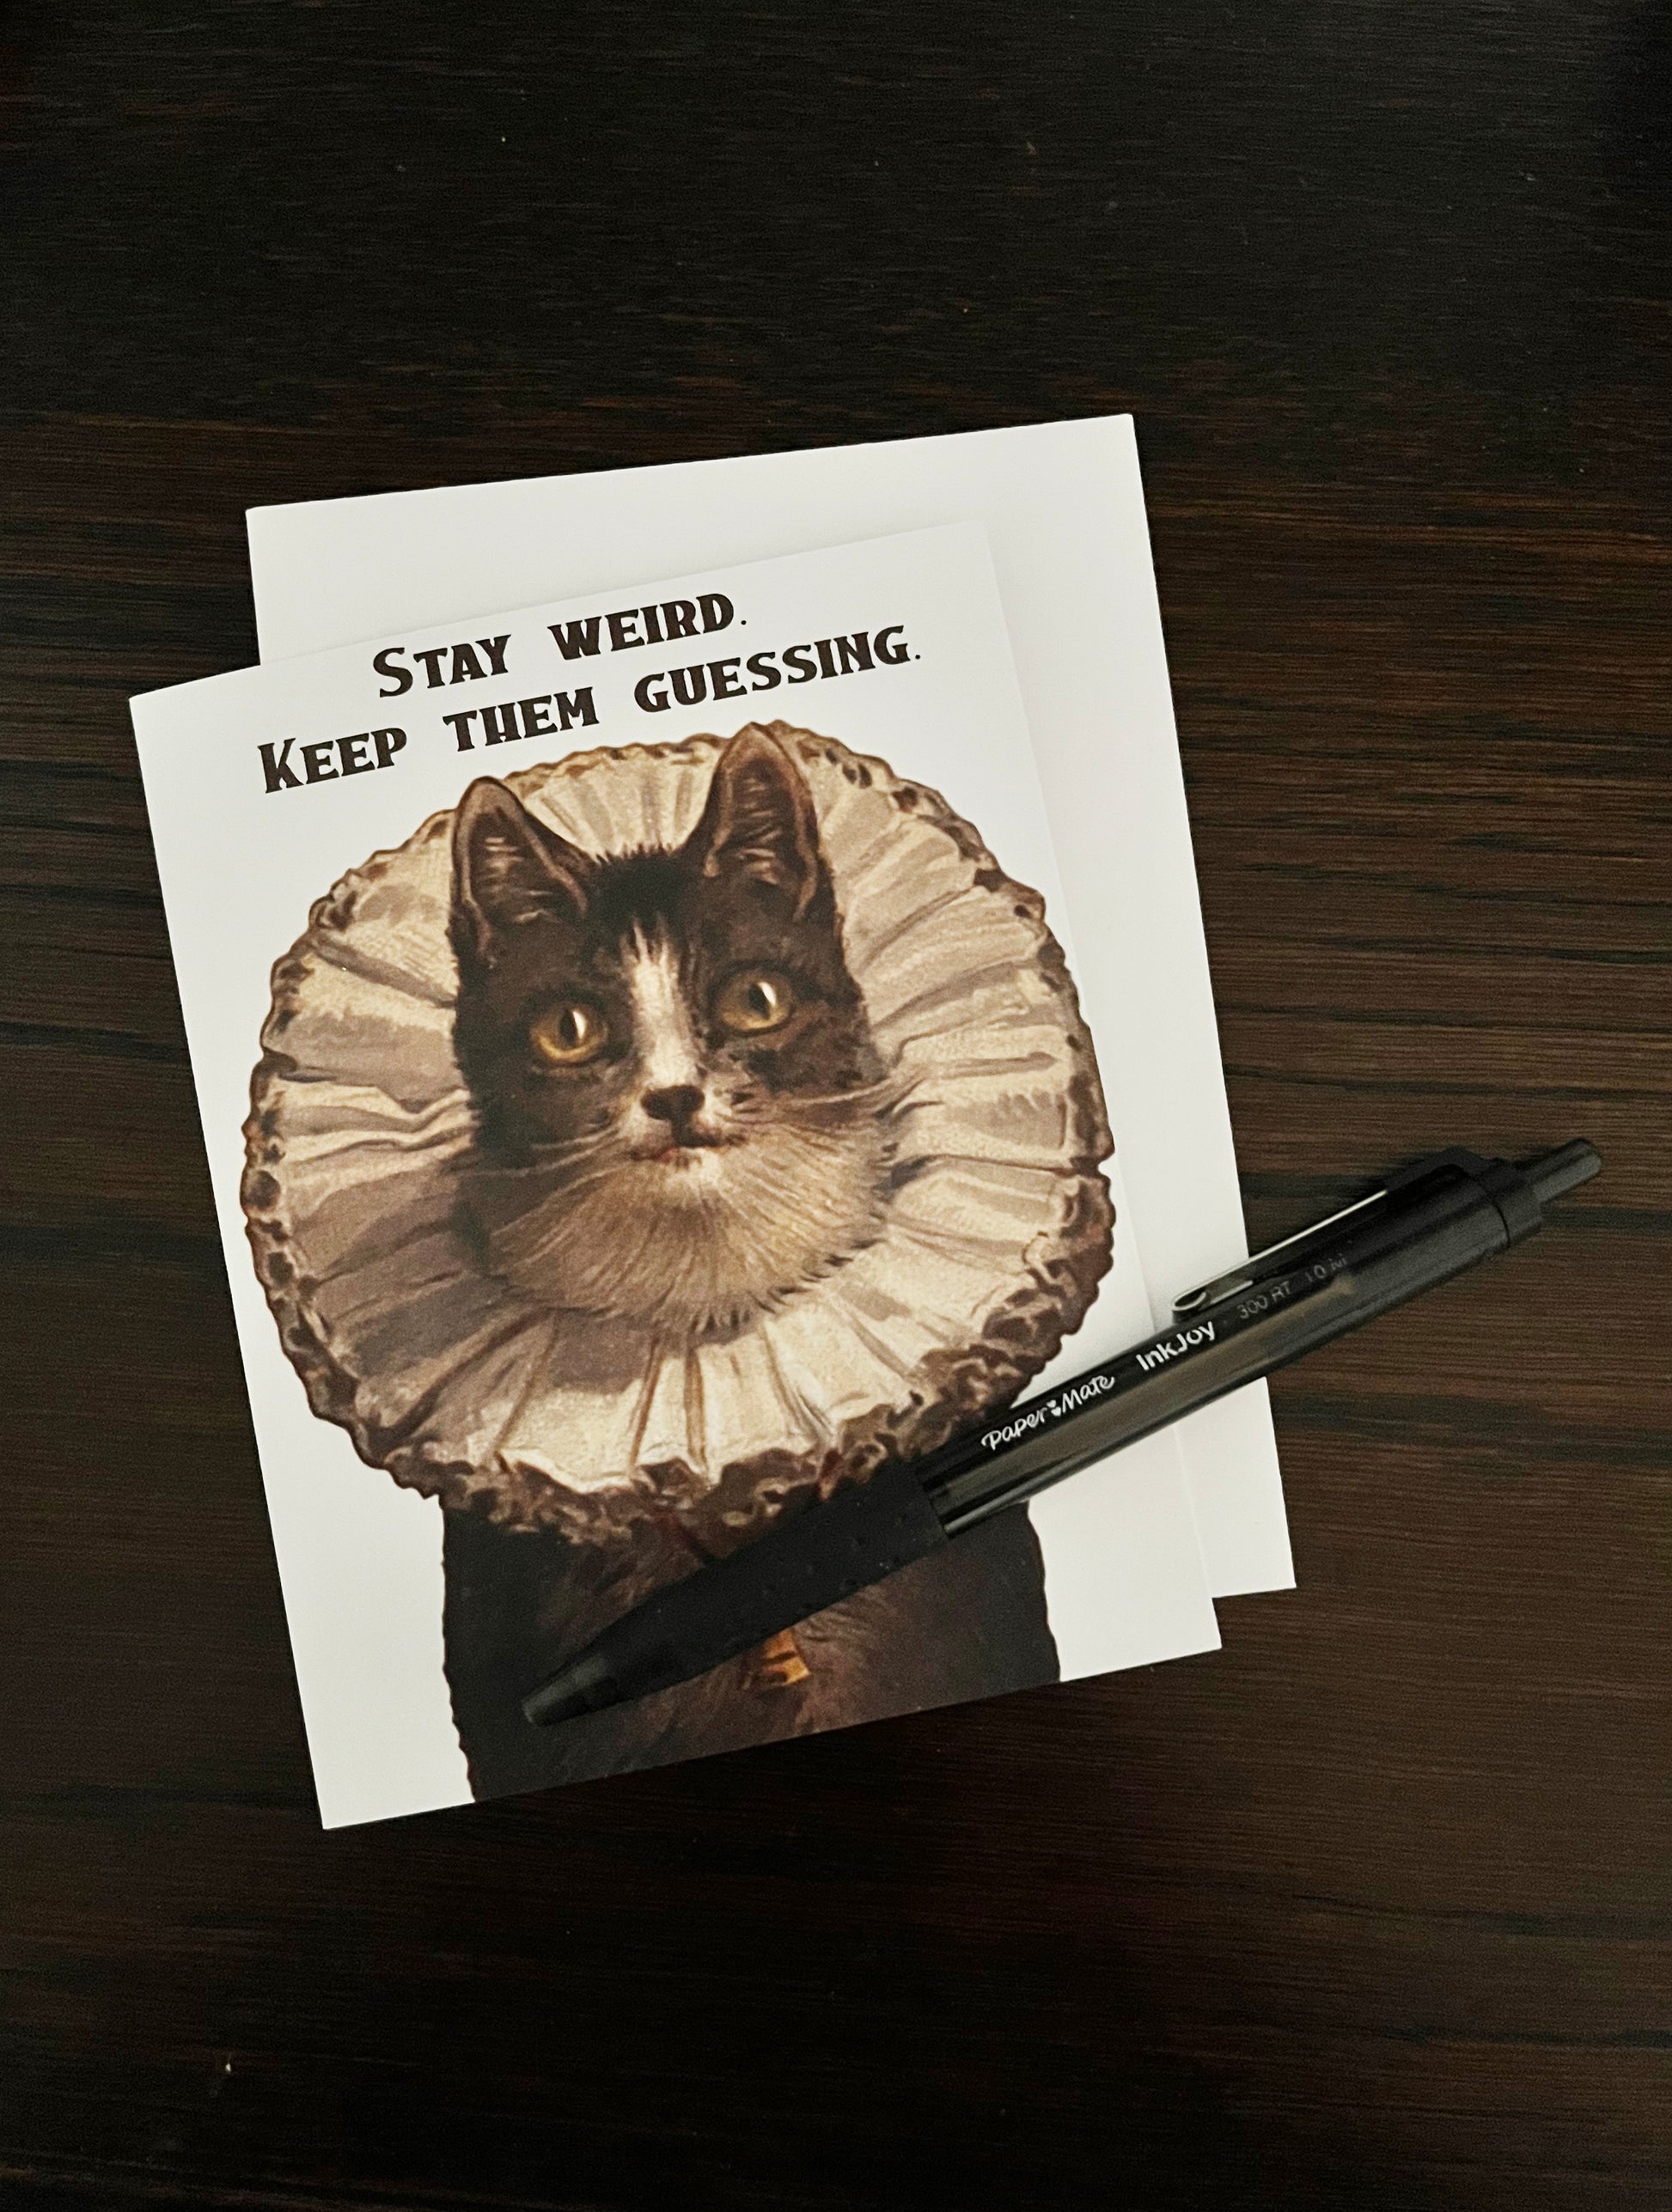 retro kitten victorian ruffle collar cute blank inside notecard greeting card fun silly kitty cat send mail snail mail letter gift says Stay Weird Keep Them Guessing